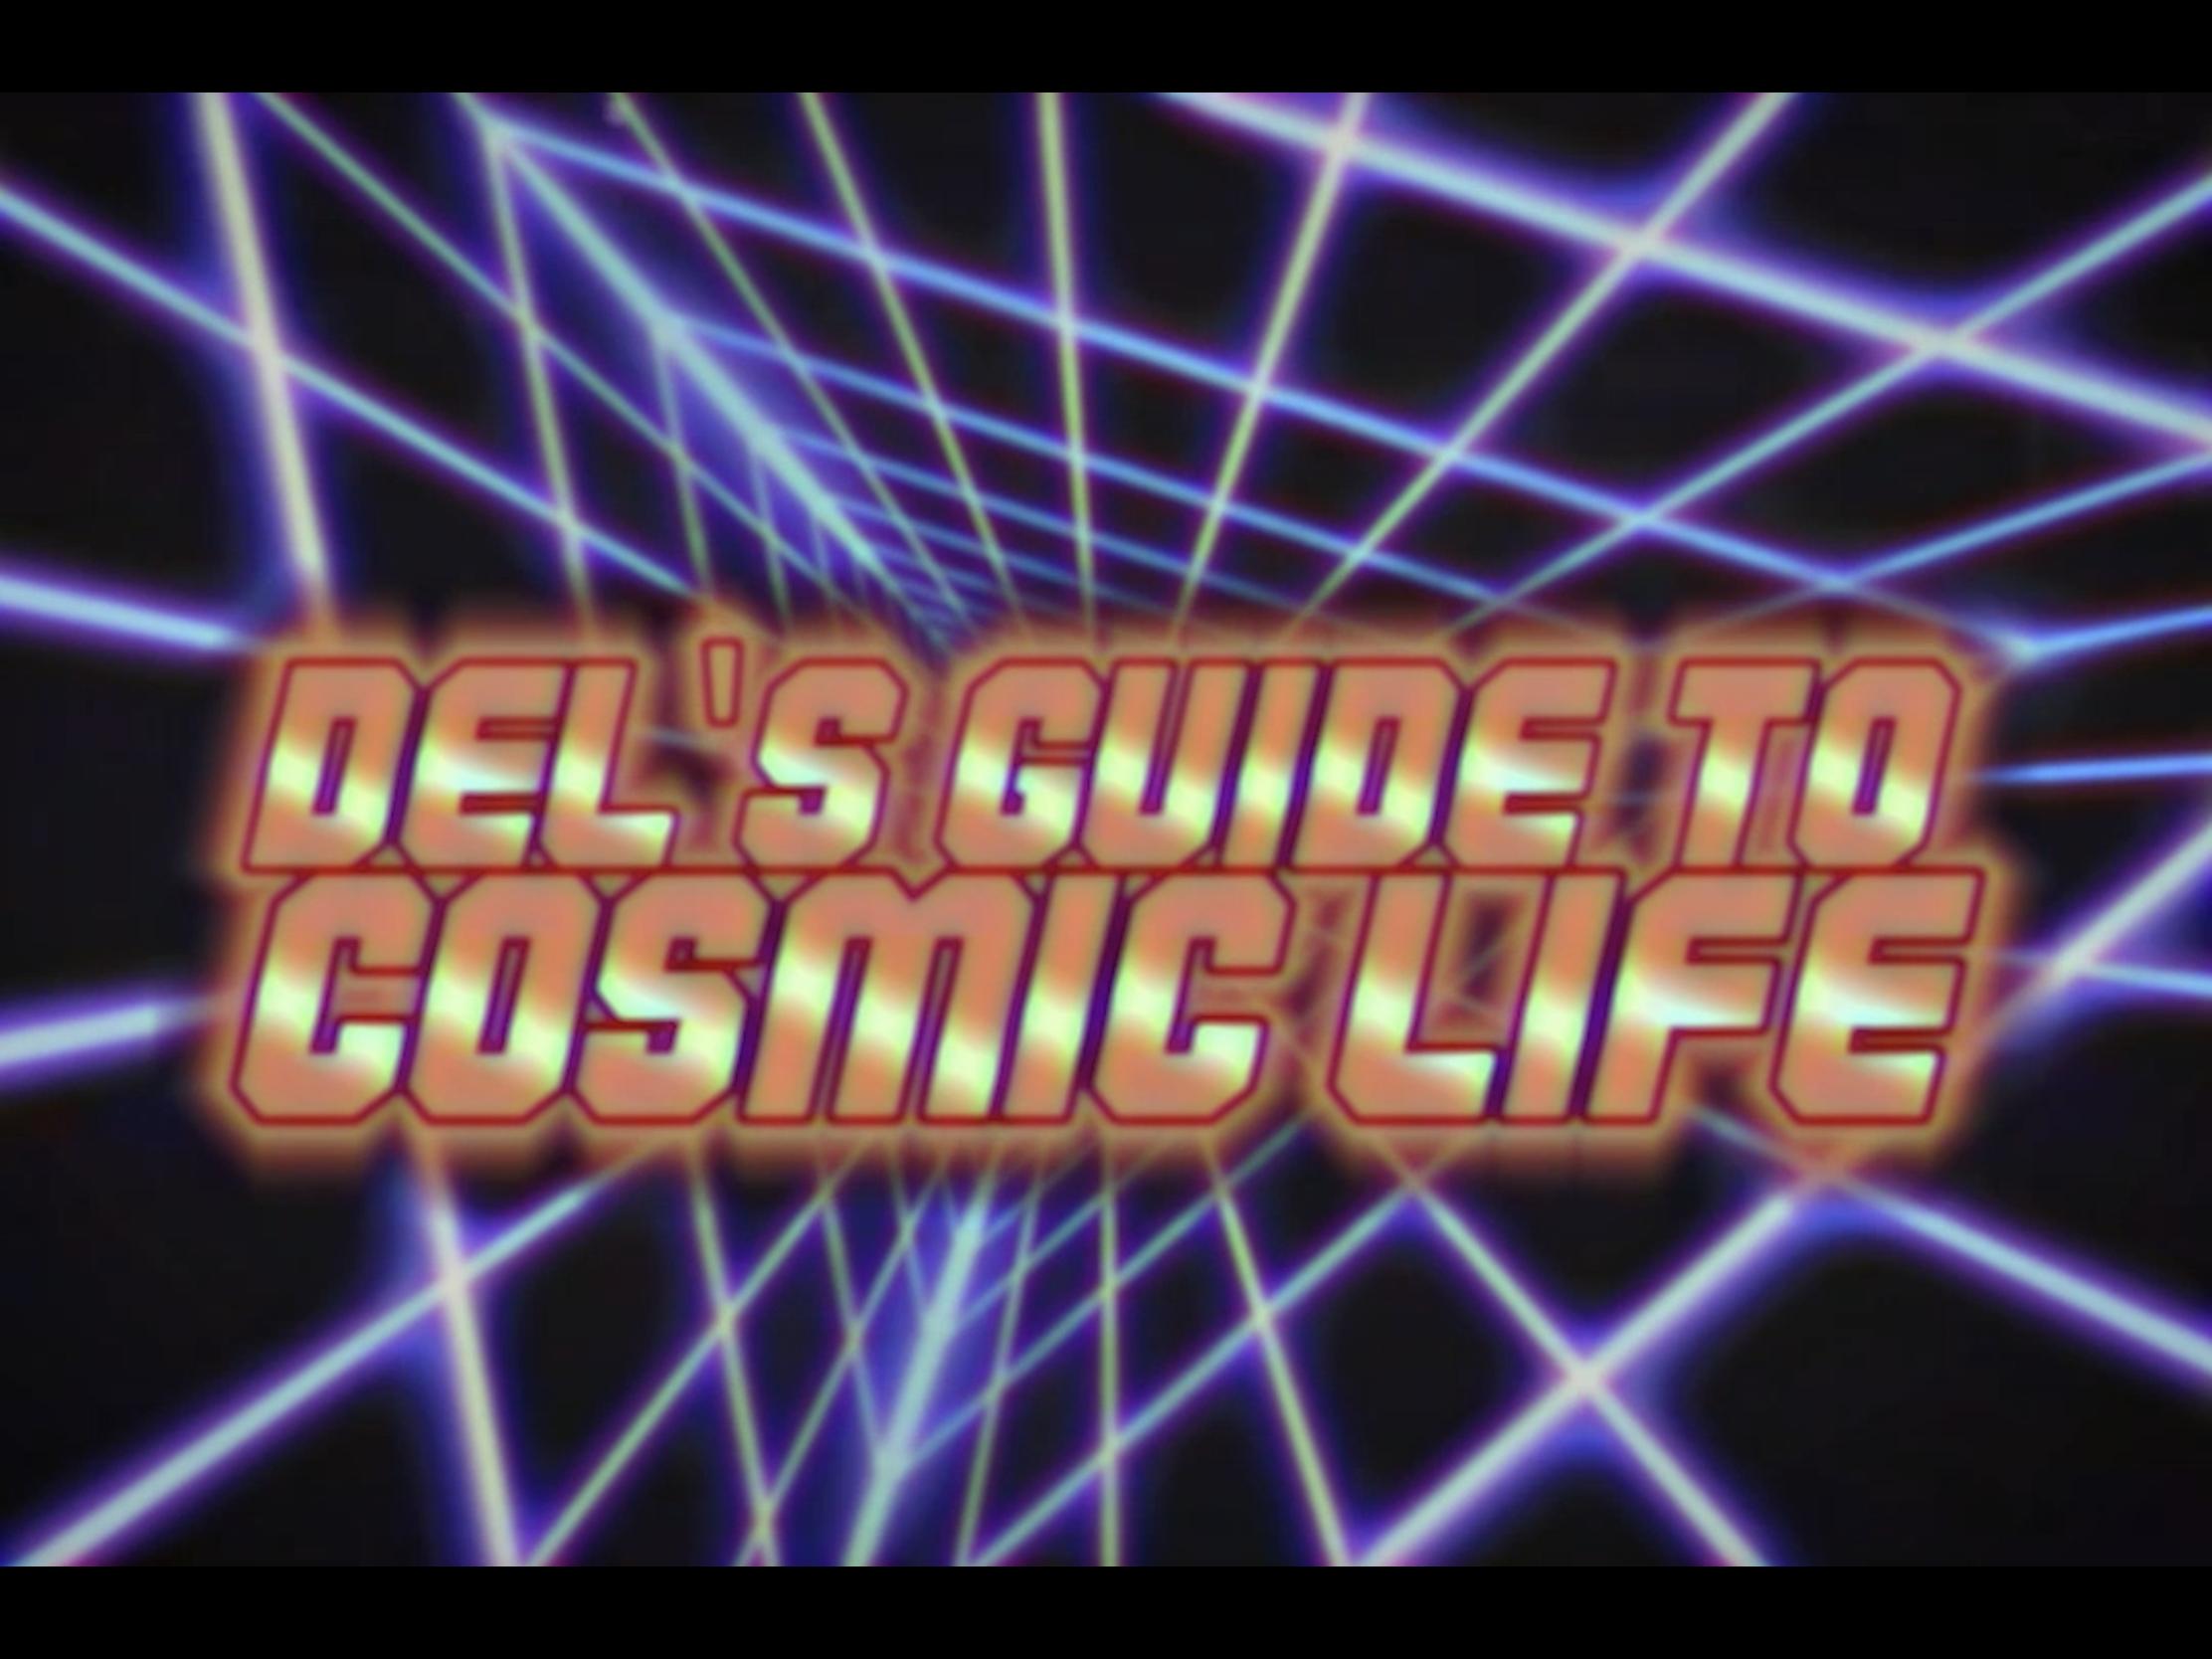 Del's Guide to Cosmic Life